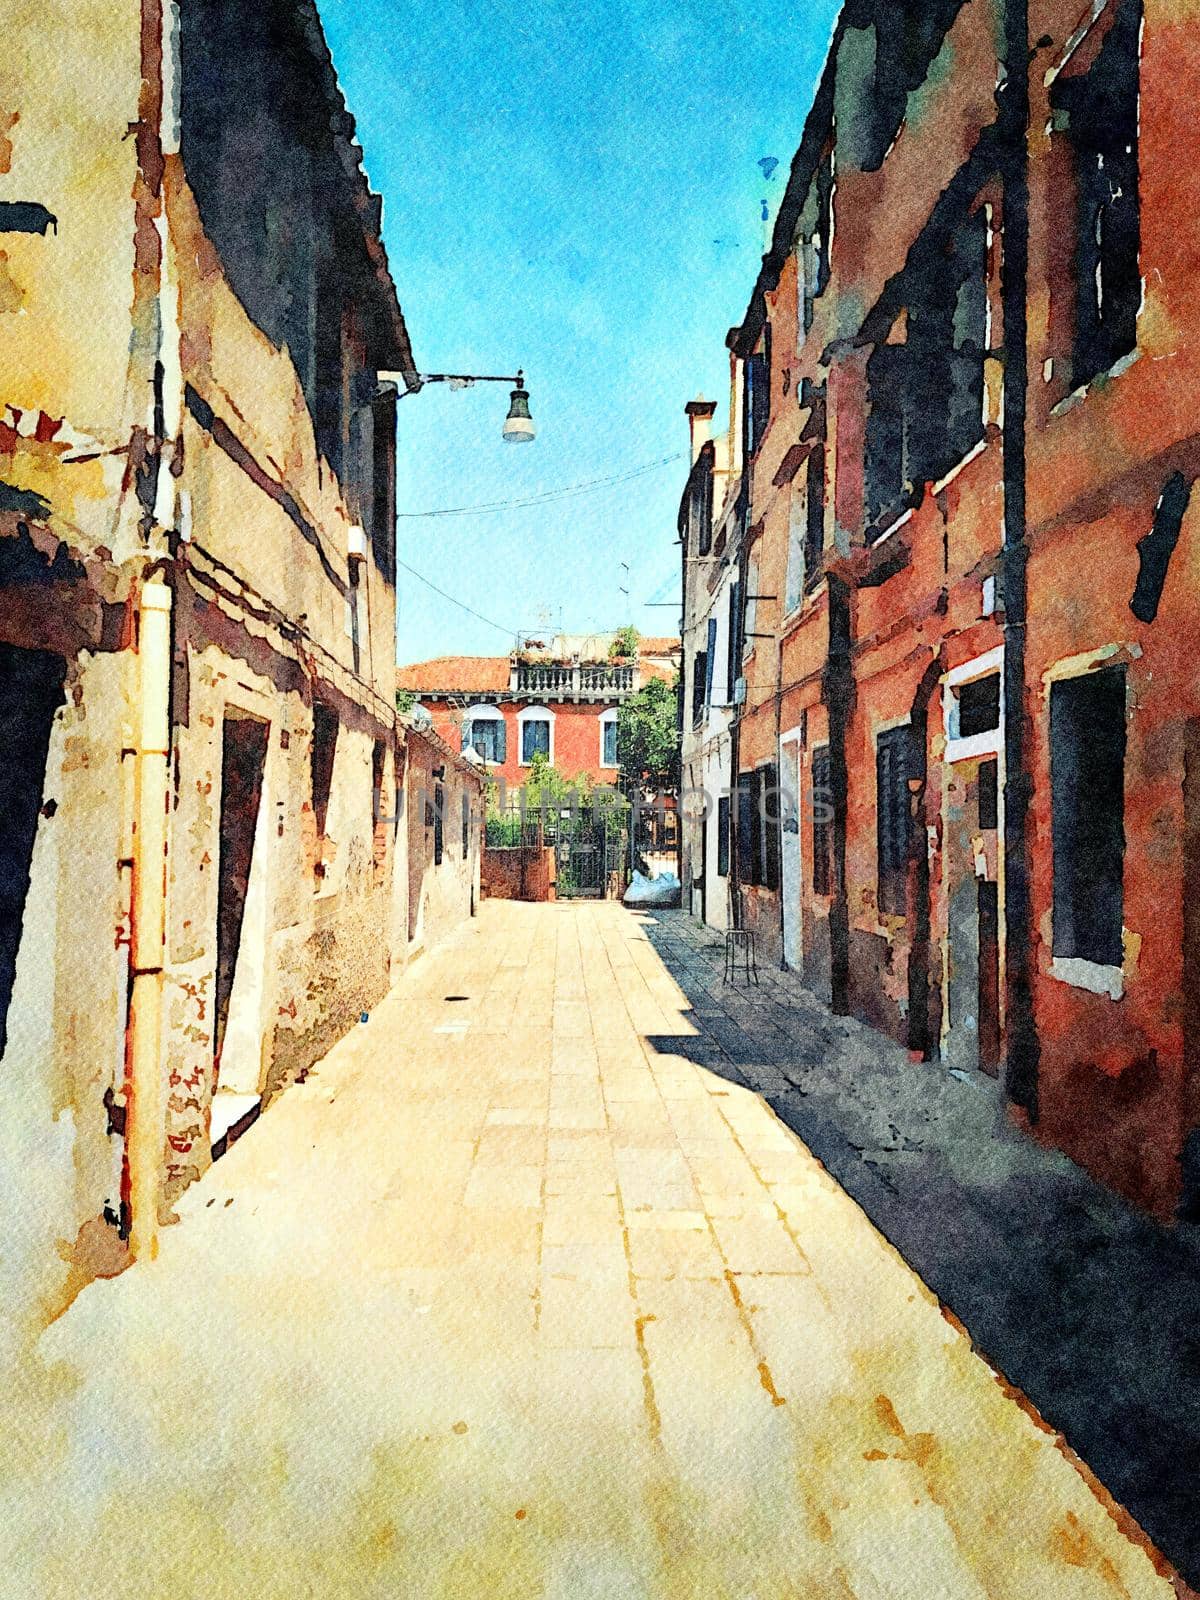 watercolor representing one of the small streets in the historic center of Venice